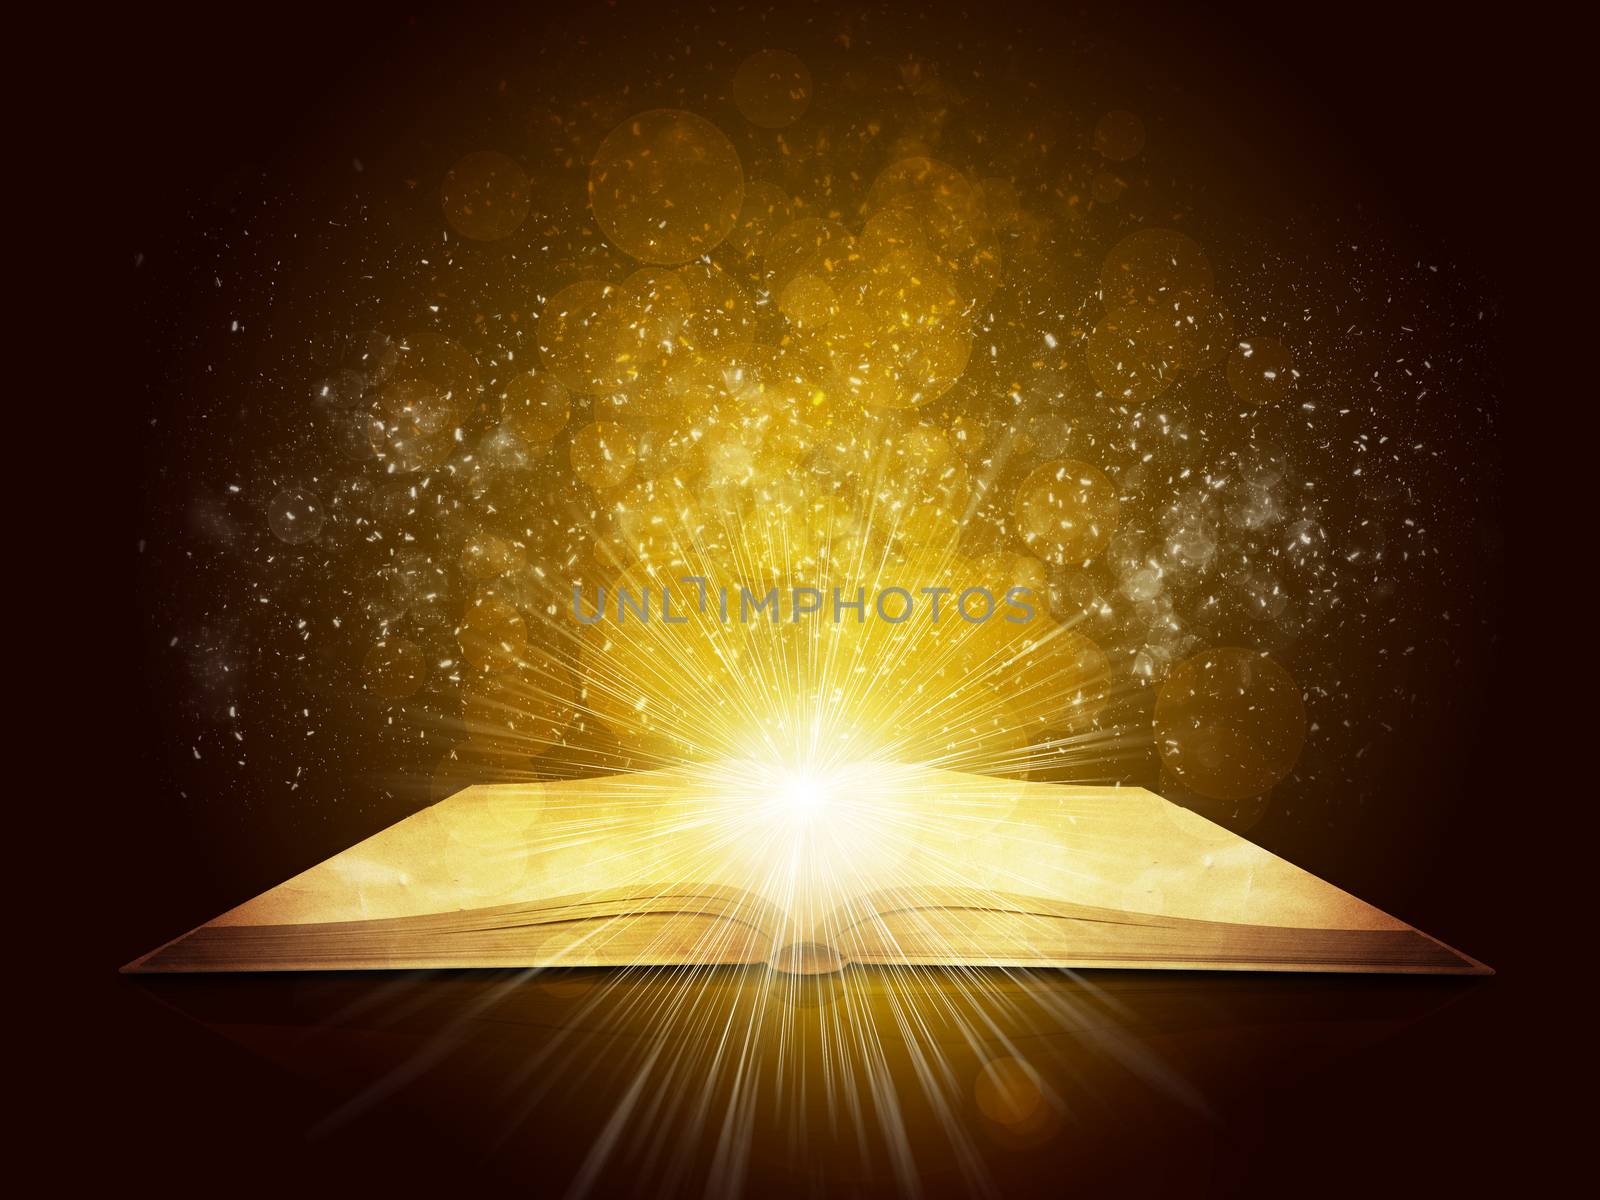 Old open book with magic light and falling stars. Dark background